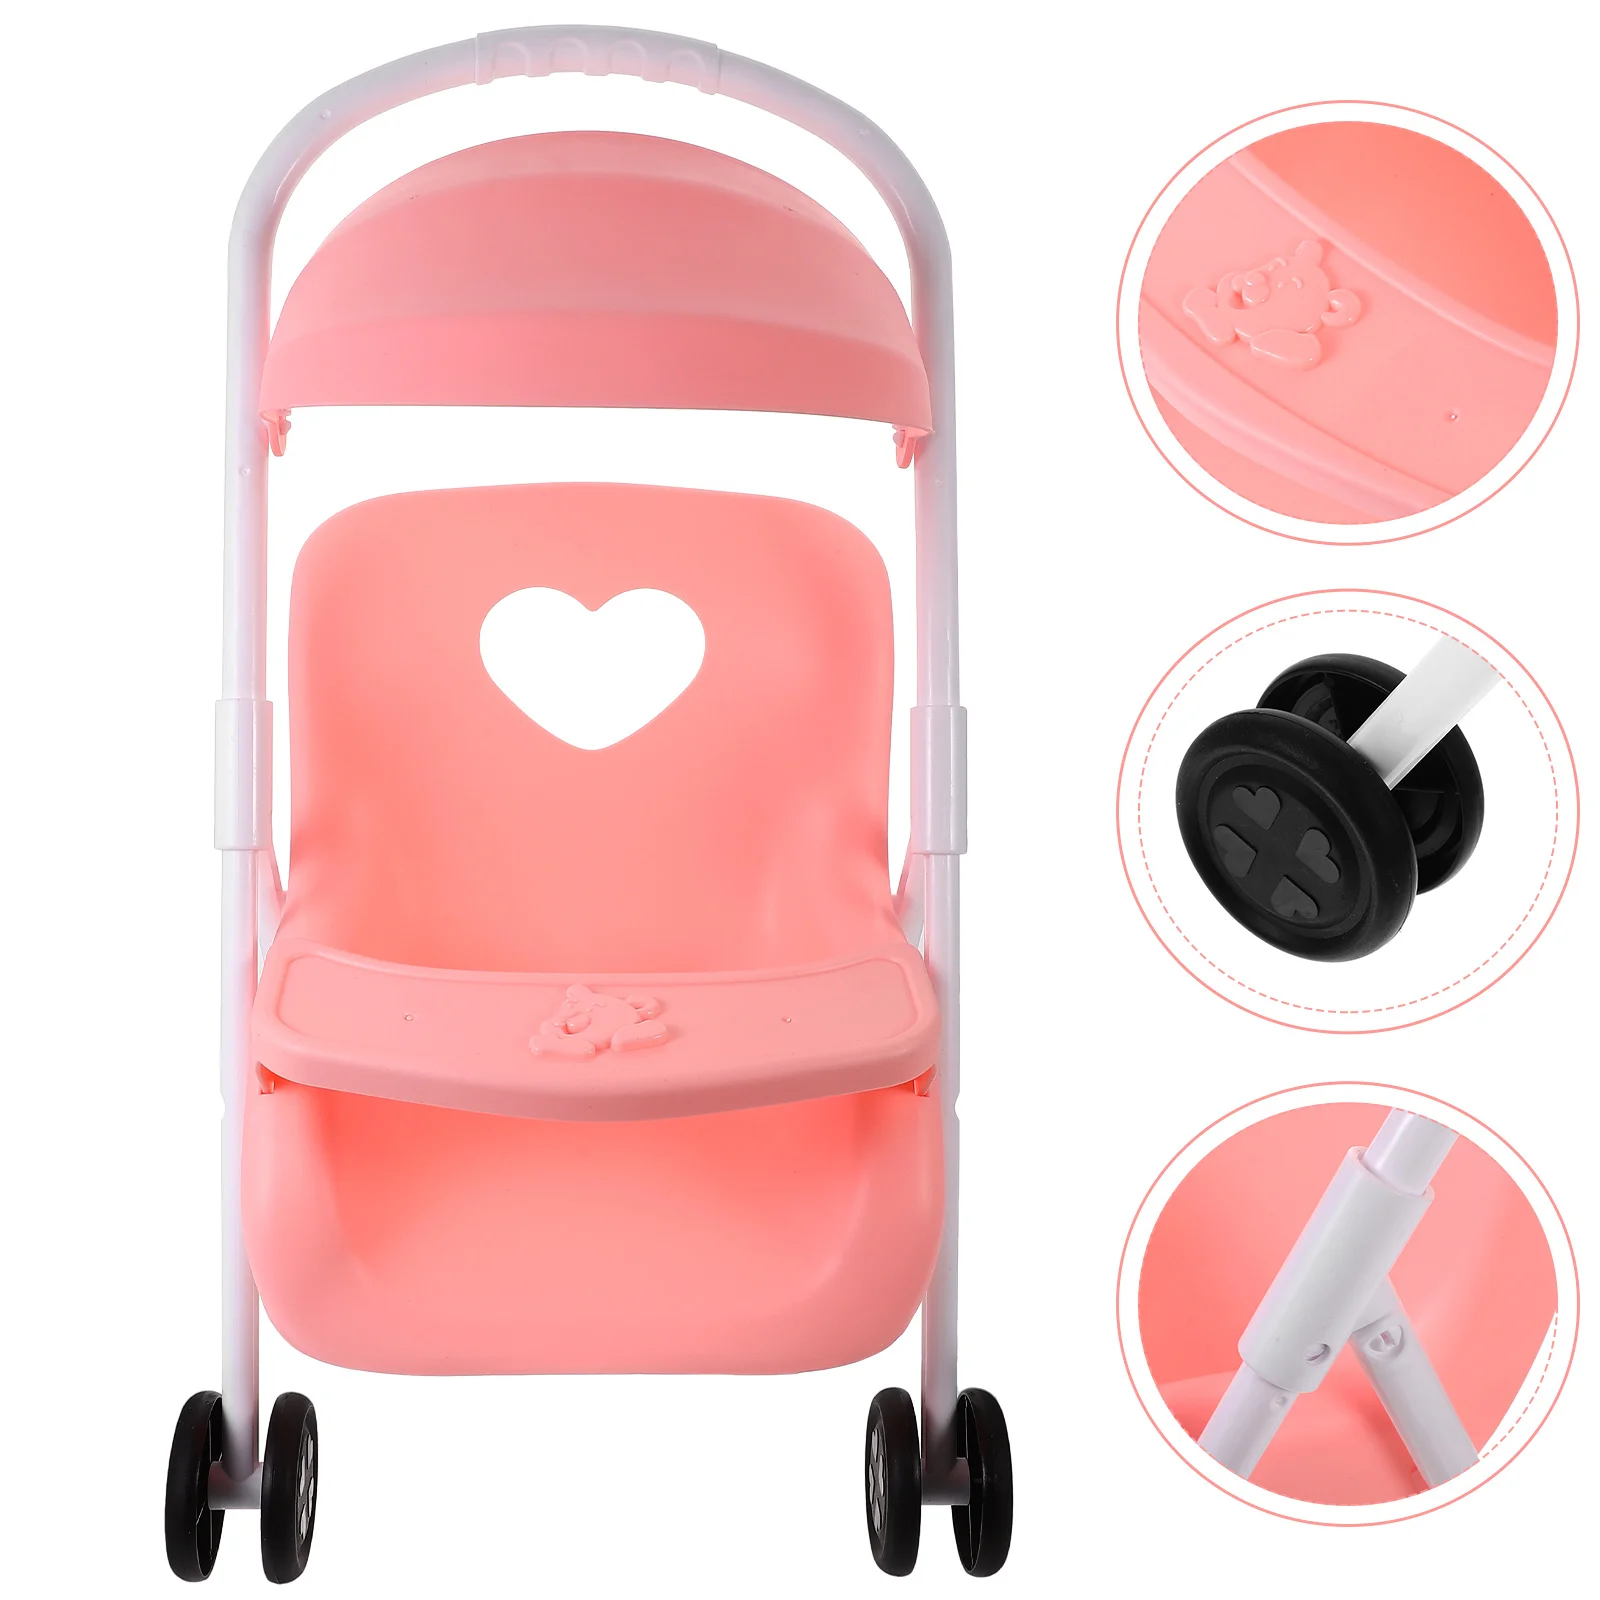 Doll Stroller Play Game Doll Stroller Simulated Play Game Stroller Furniture Adornment Children Role Playing Game for Dollhouse